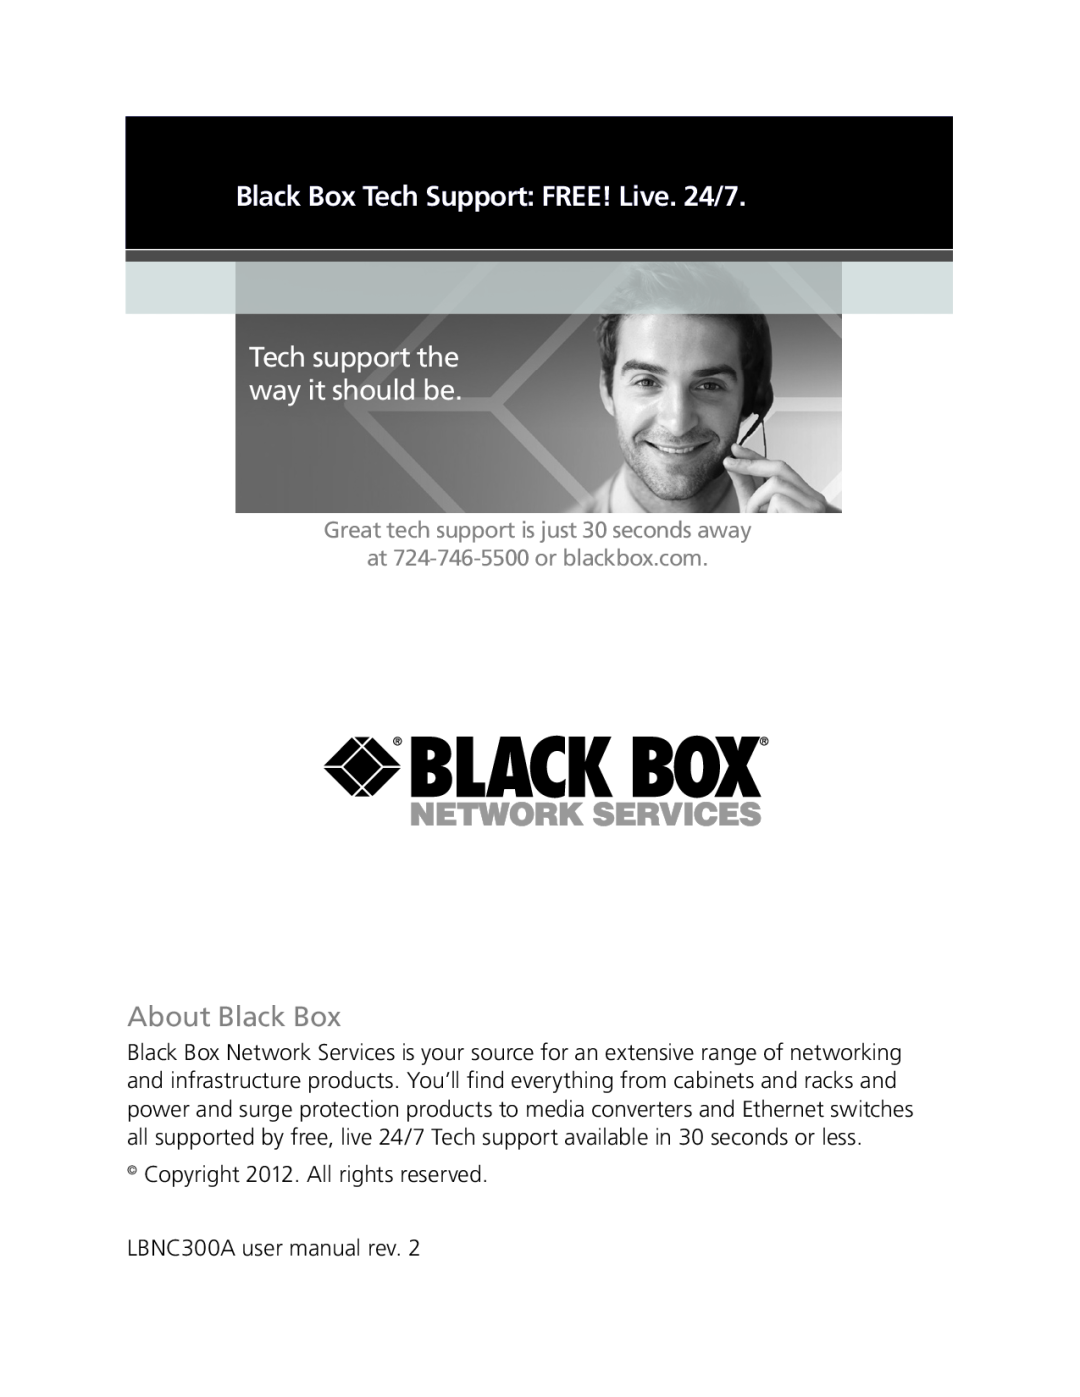 Black Box LBNC300AE user manual Tech support the way it should be, Black Box Tech Support FREE! Live. 24/7, About Black Box 